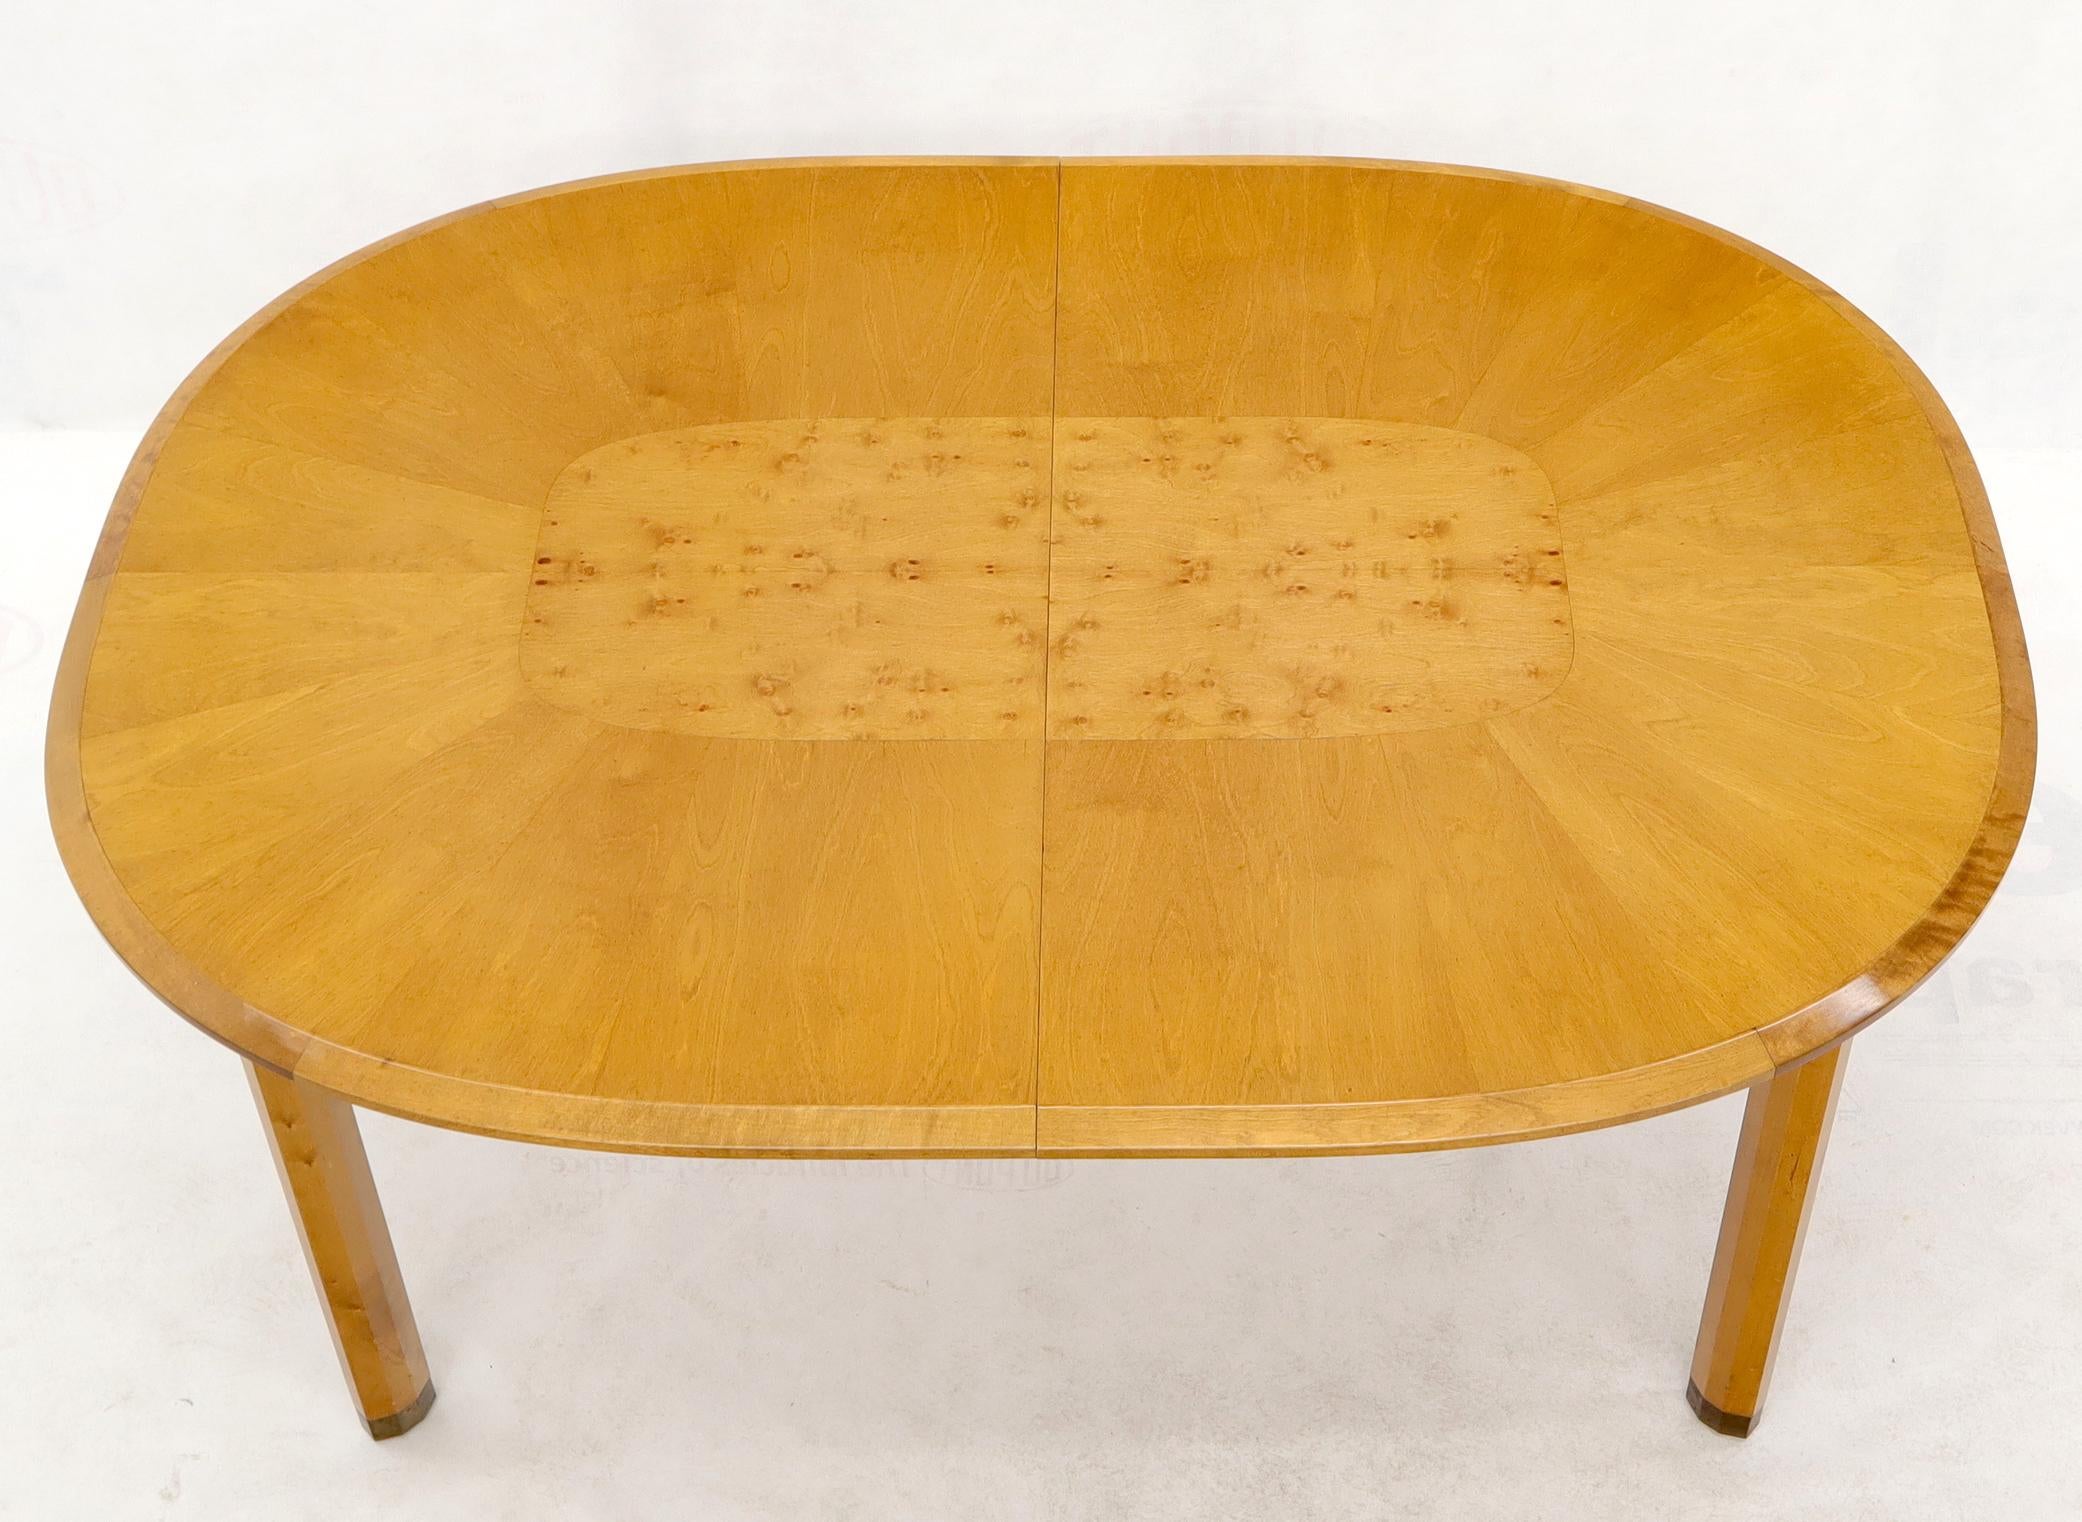 Blond Swedish Birch with Burl Oval Racetrack Dining Table Spece 2